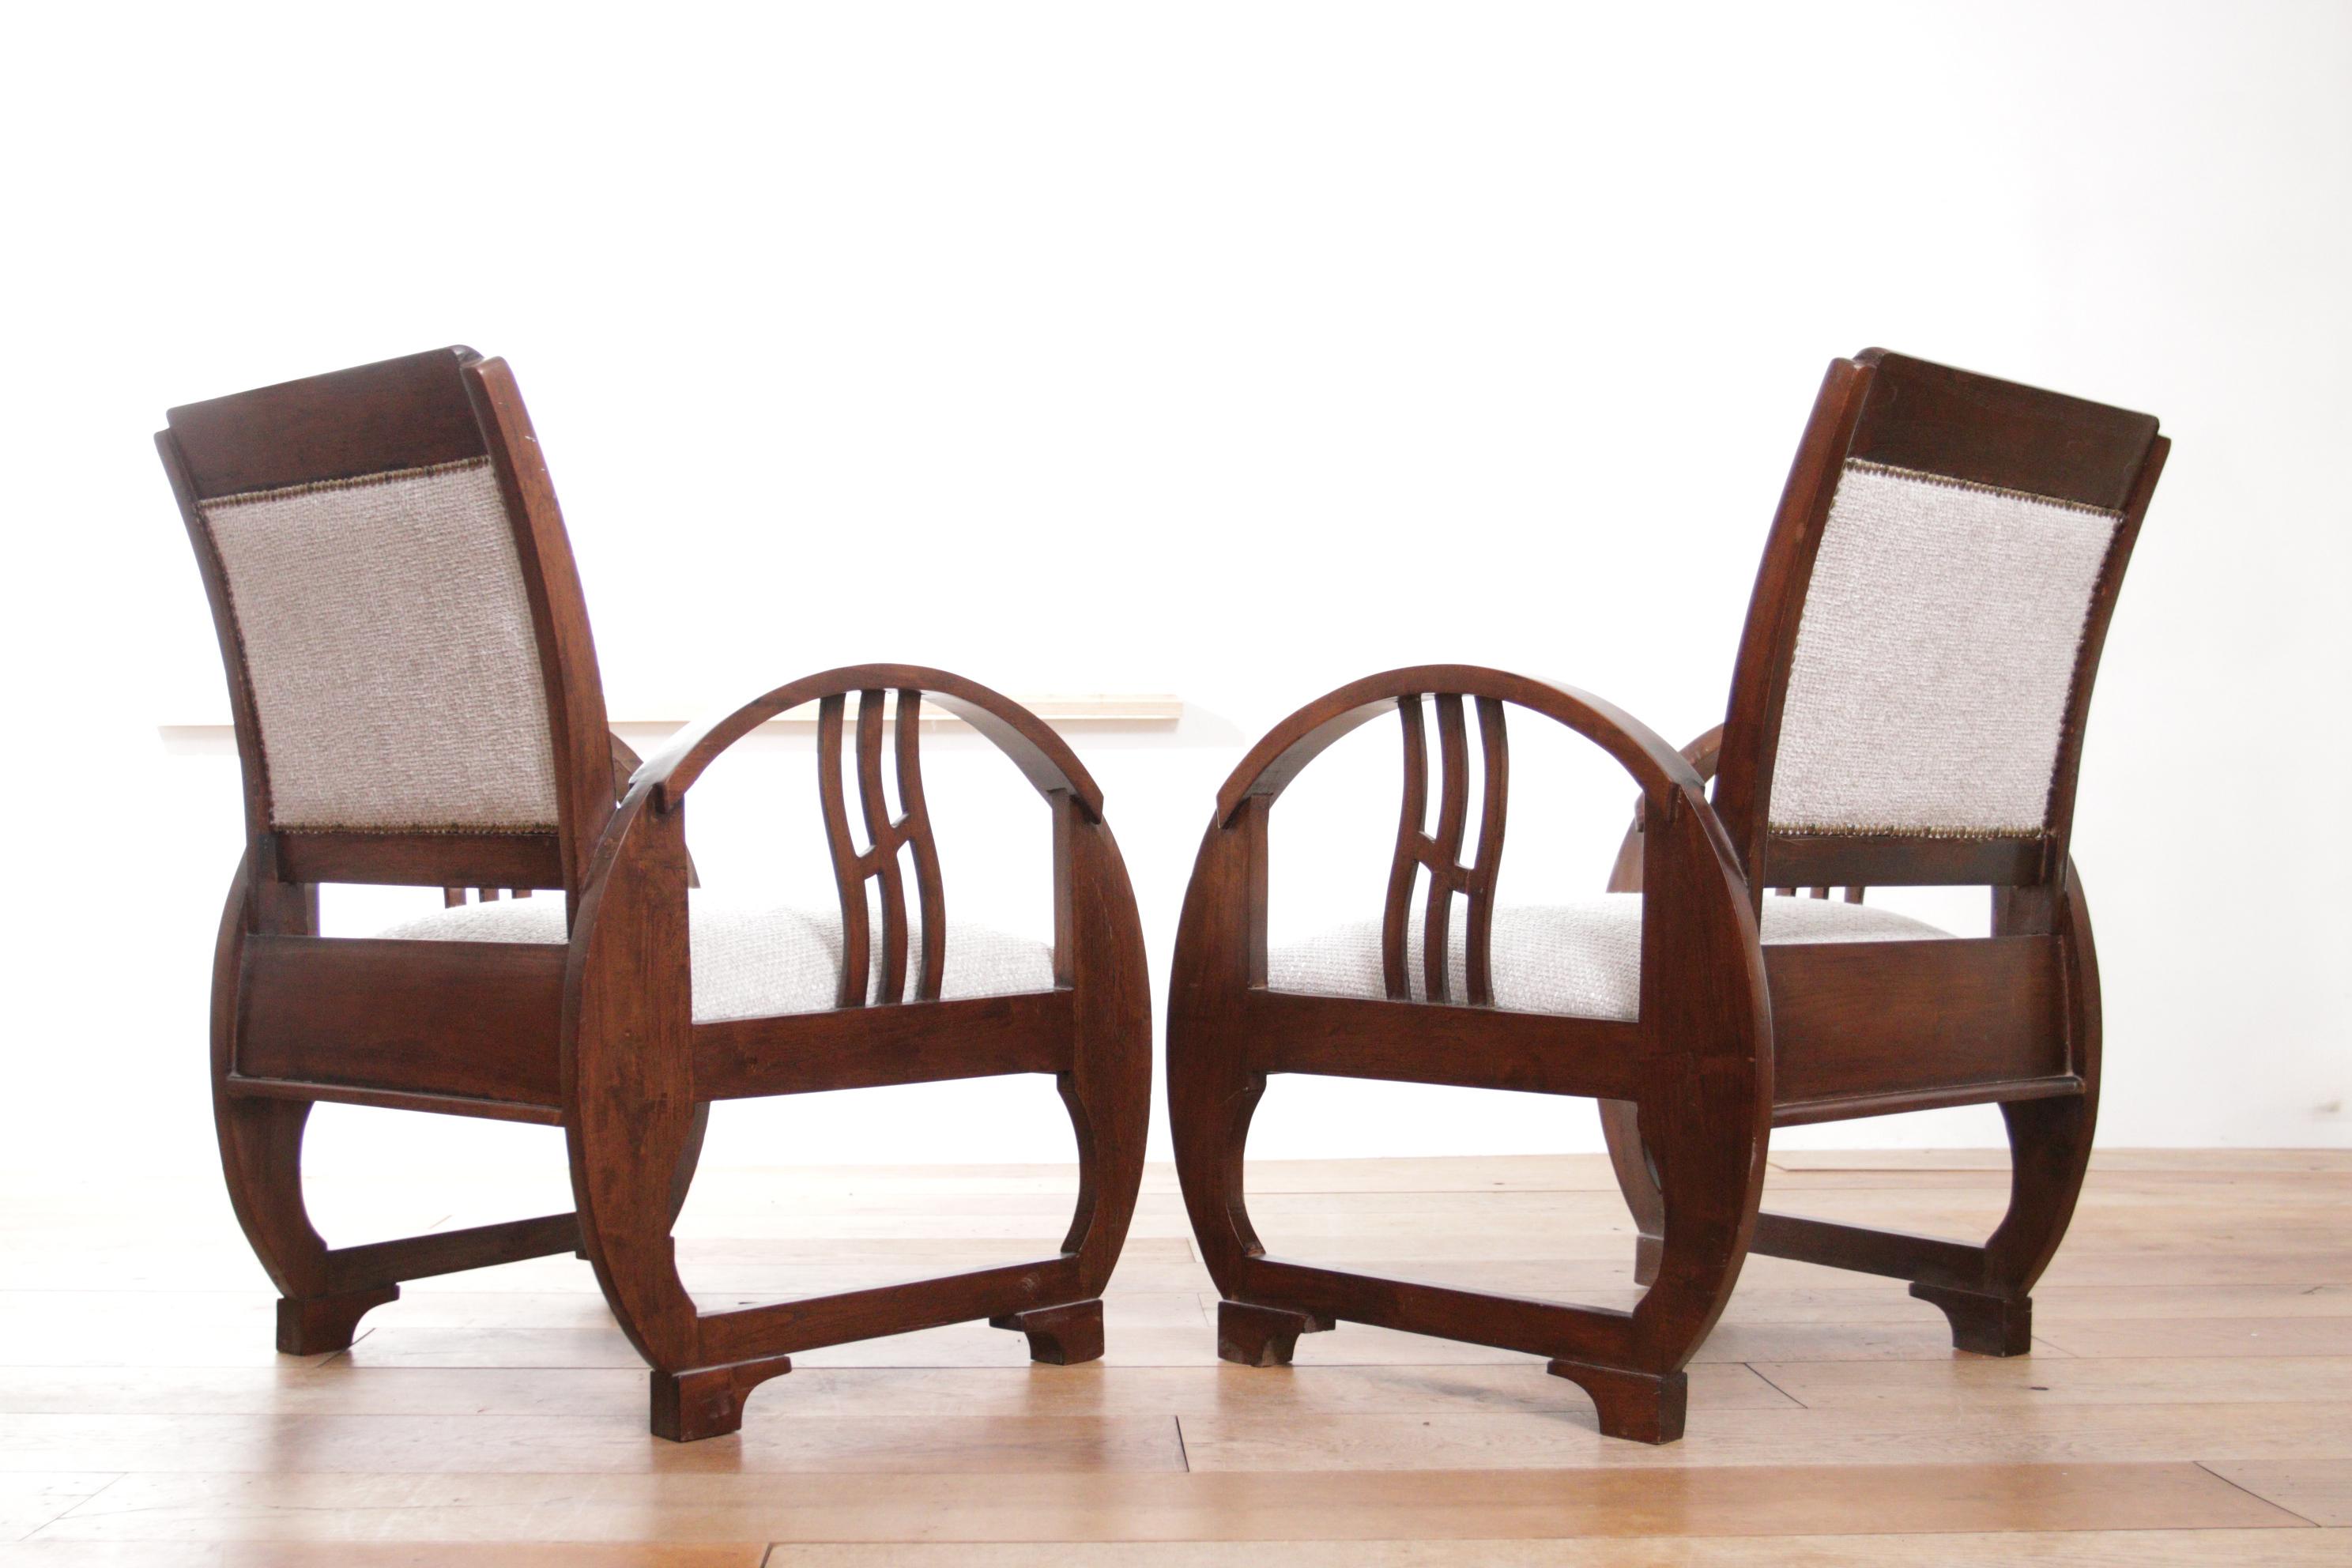 Two Rare Exclusive Elegant Art Deco Vintage French Wooden Armchairs 1930's For Sale 7